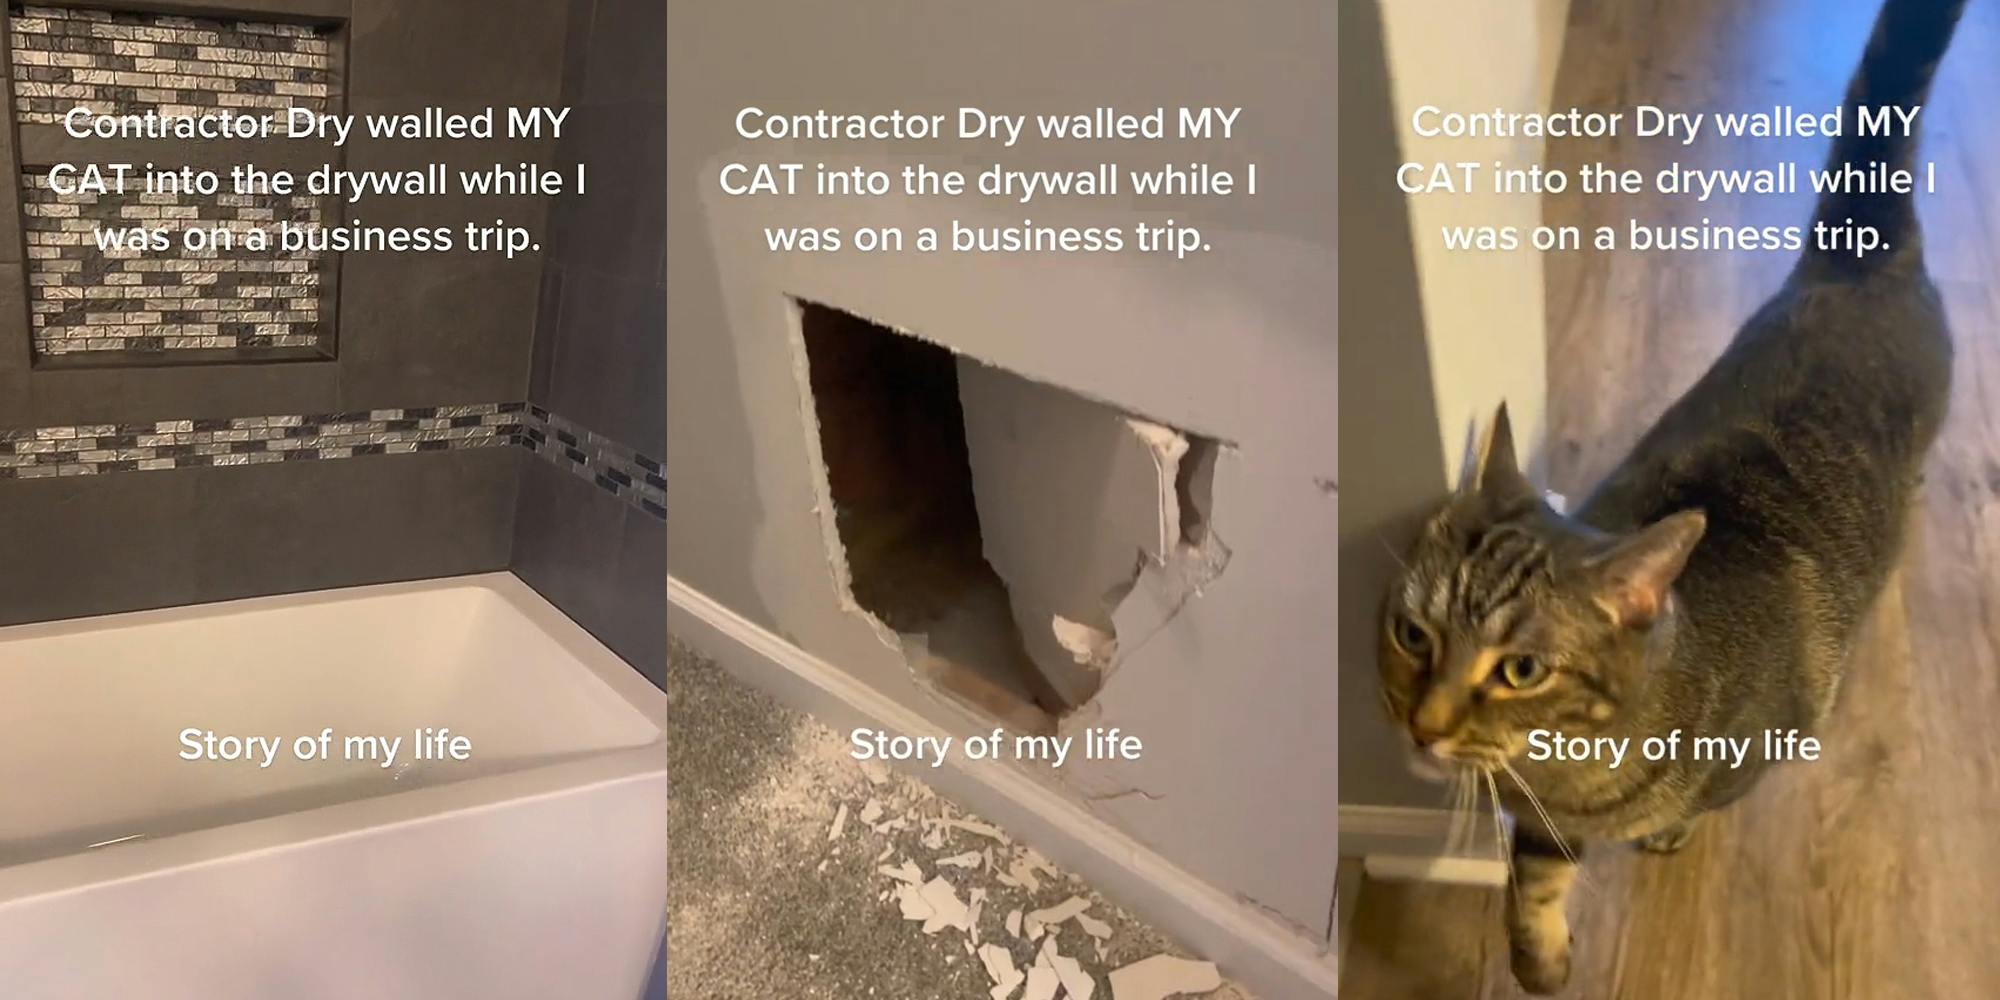 Bathroom shower and bathtub caption 'Contractor Dry walled MY cat into the drywall while I was on a business trip. Story of my life' (l) Hole punched into wall caption 'Contractor Dry walled MY cat into the drywall while I was on a business trip. Story of my life' (c) cat rubbing against wall caption 'Contractor Dry walled MY cat into the drywall while I was on a business trip. Story of my life' (r)